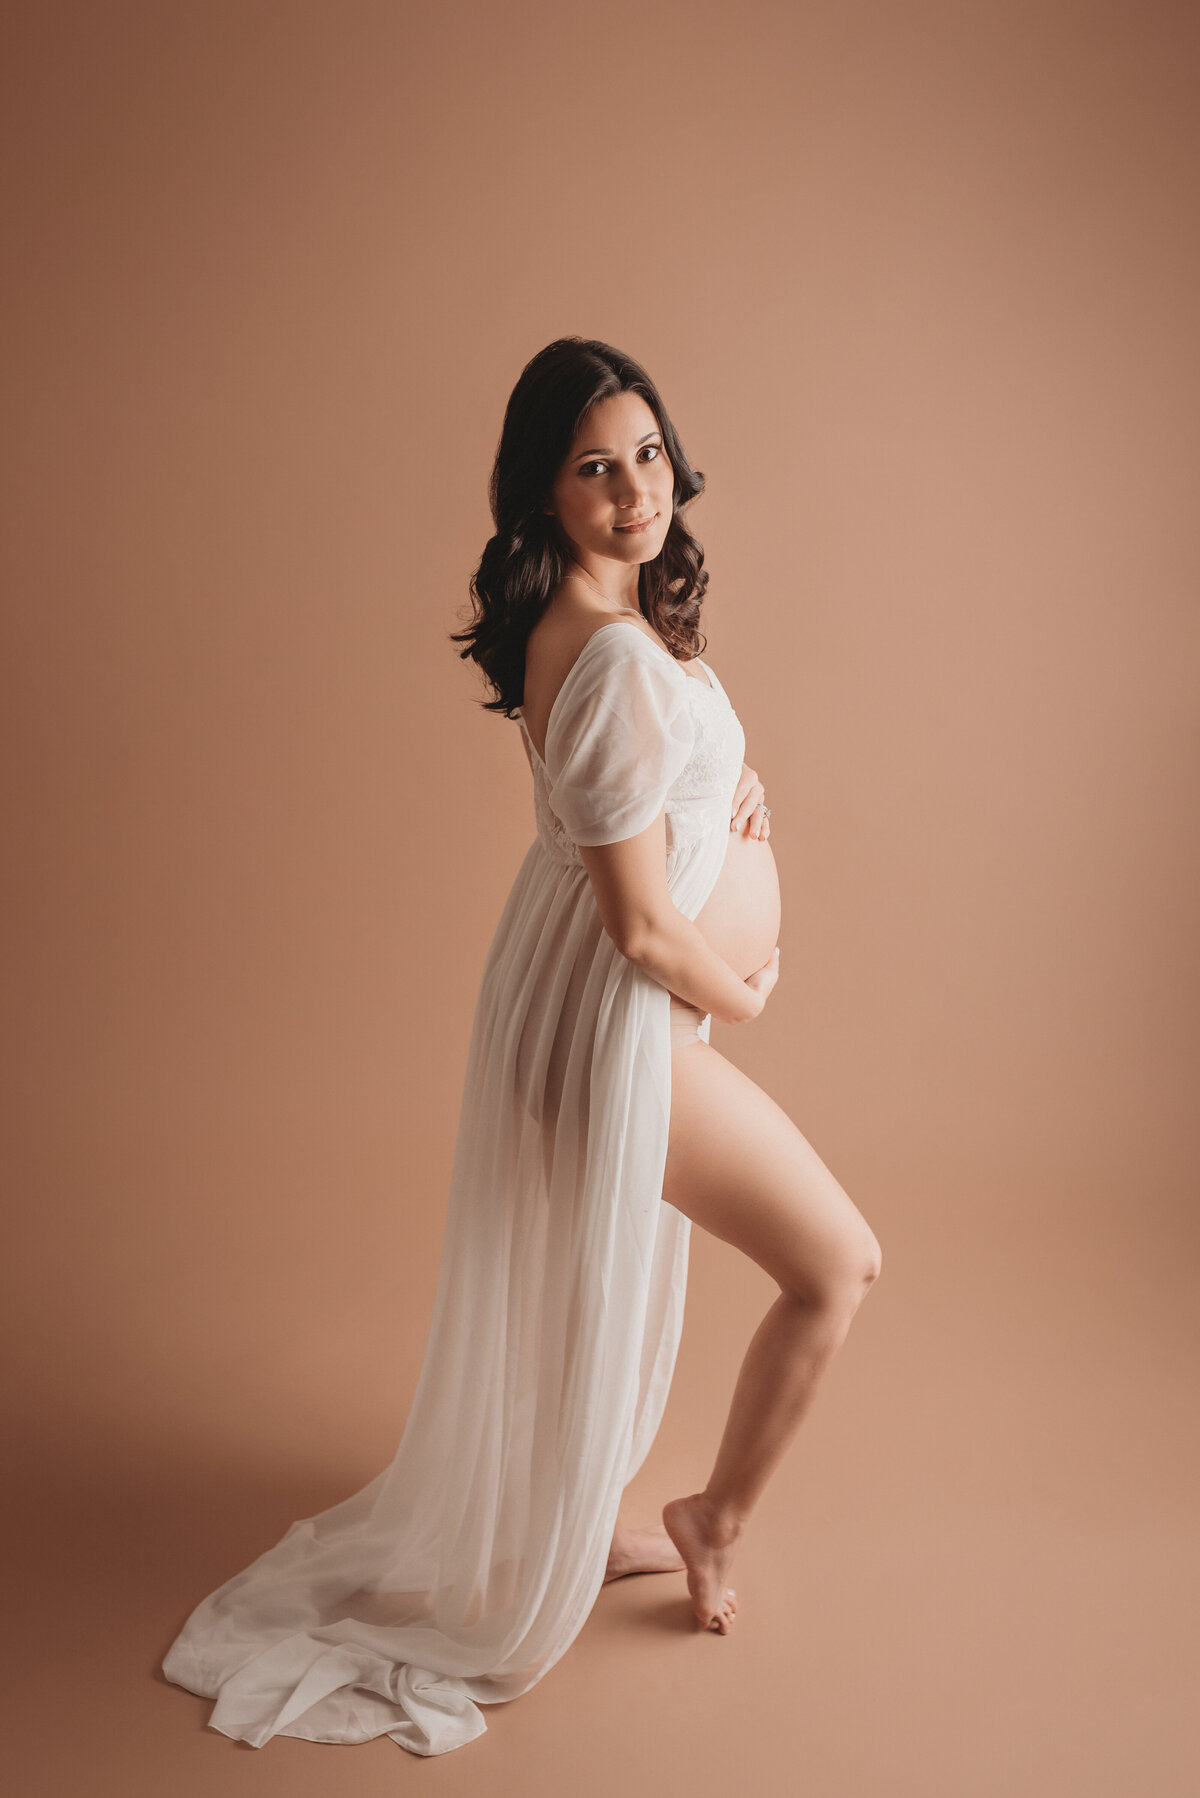 Pregnancy portrait on tan backdrop with 36 week pregnant woman holding baby bump looking at the camera and wearing sheer white maternity gown open on tummy